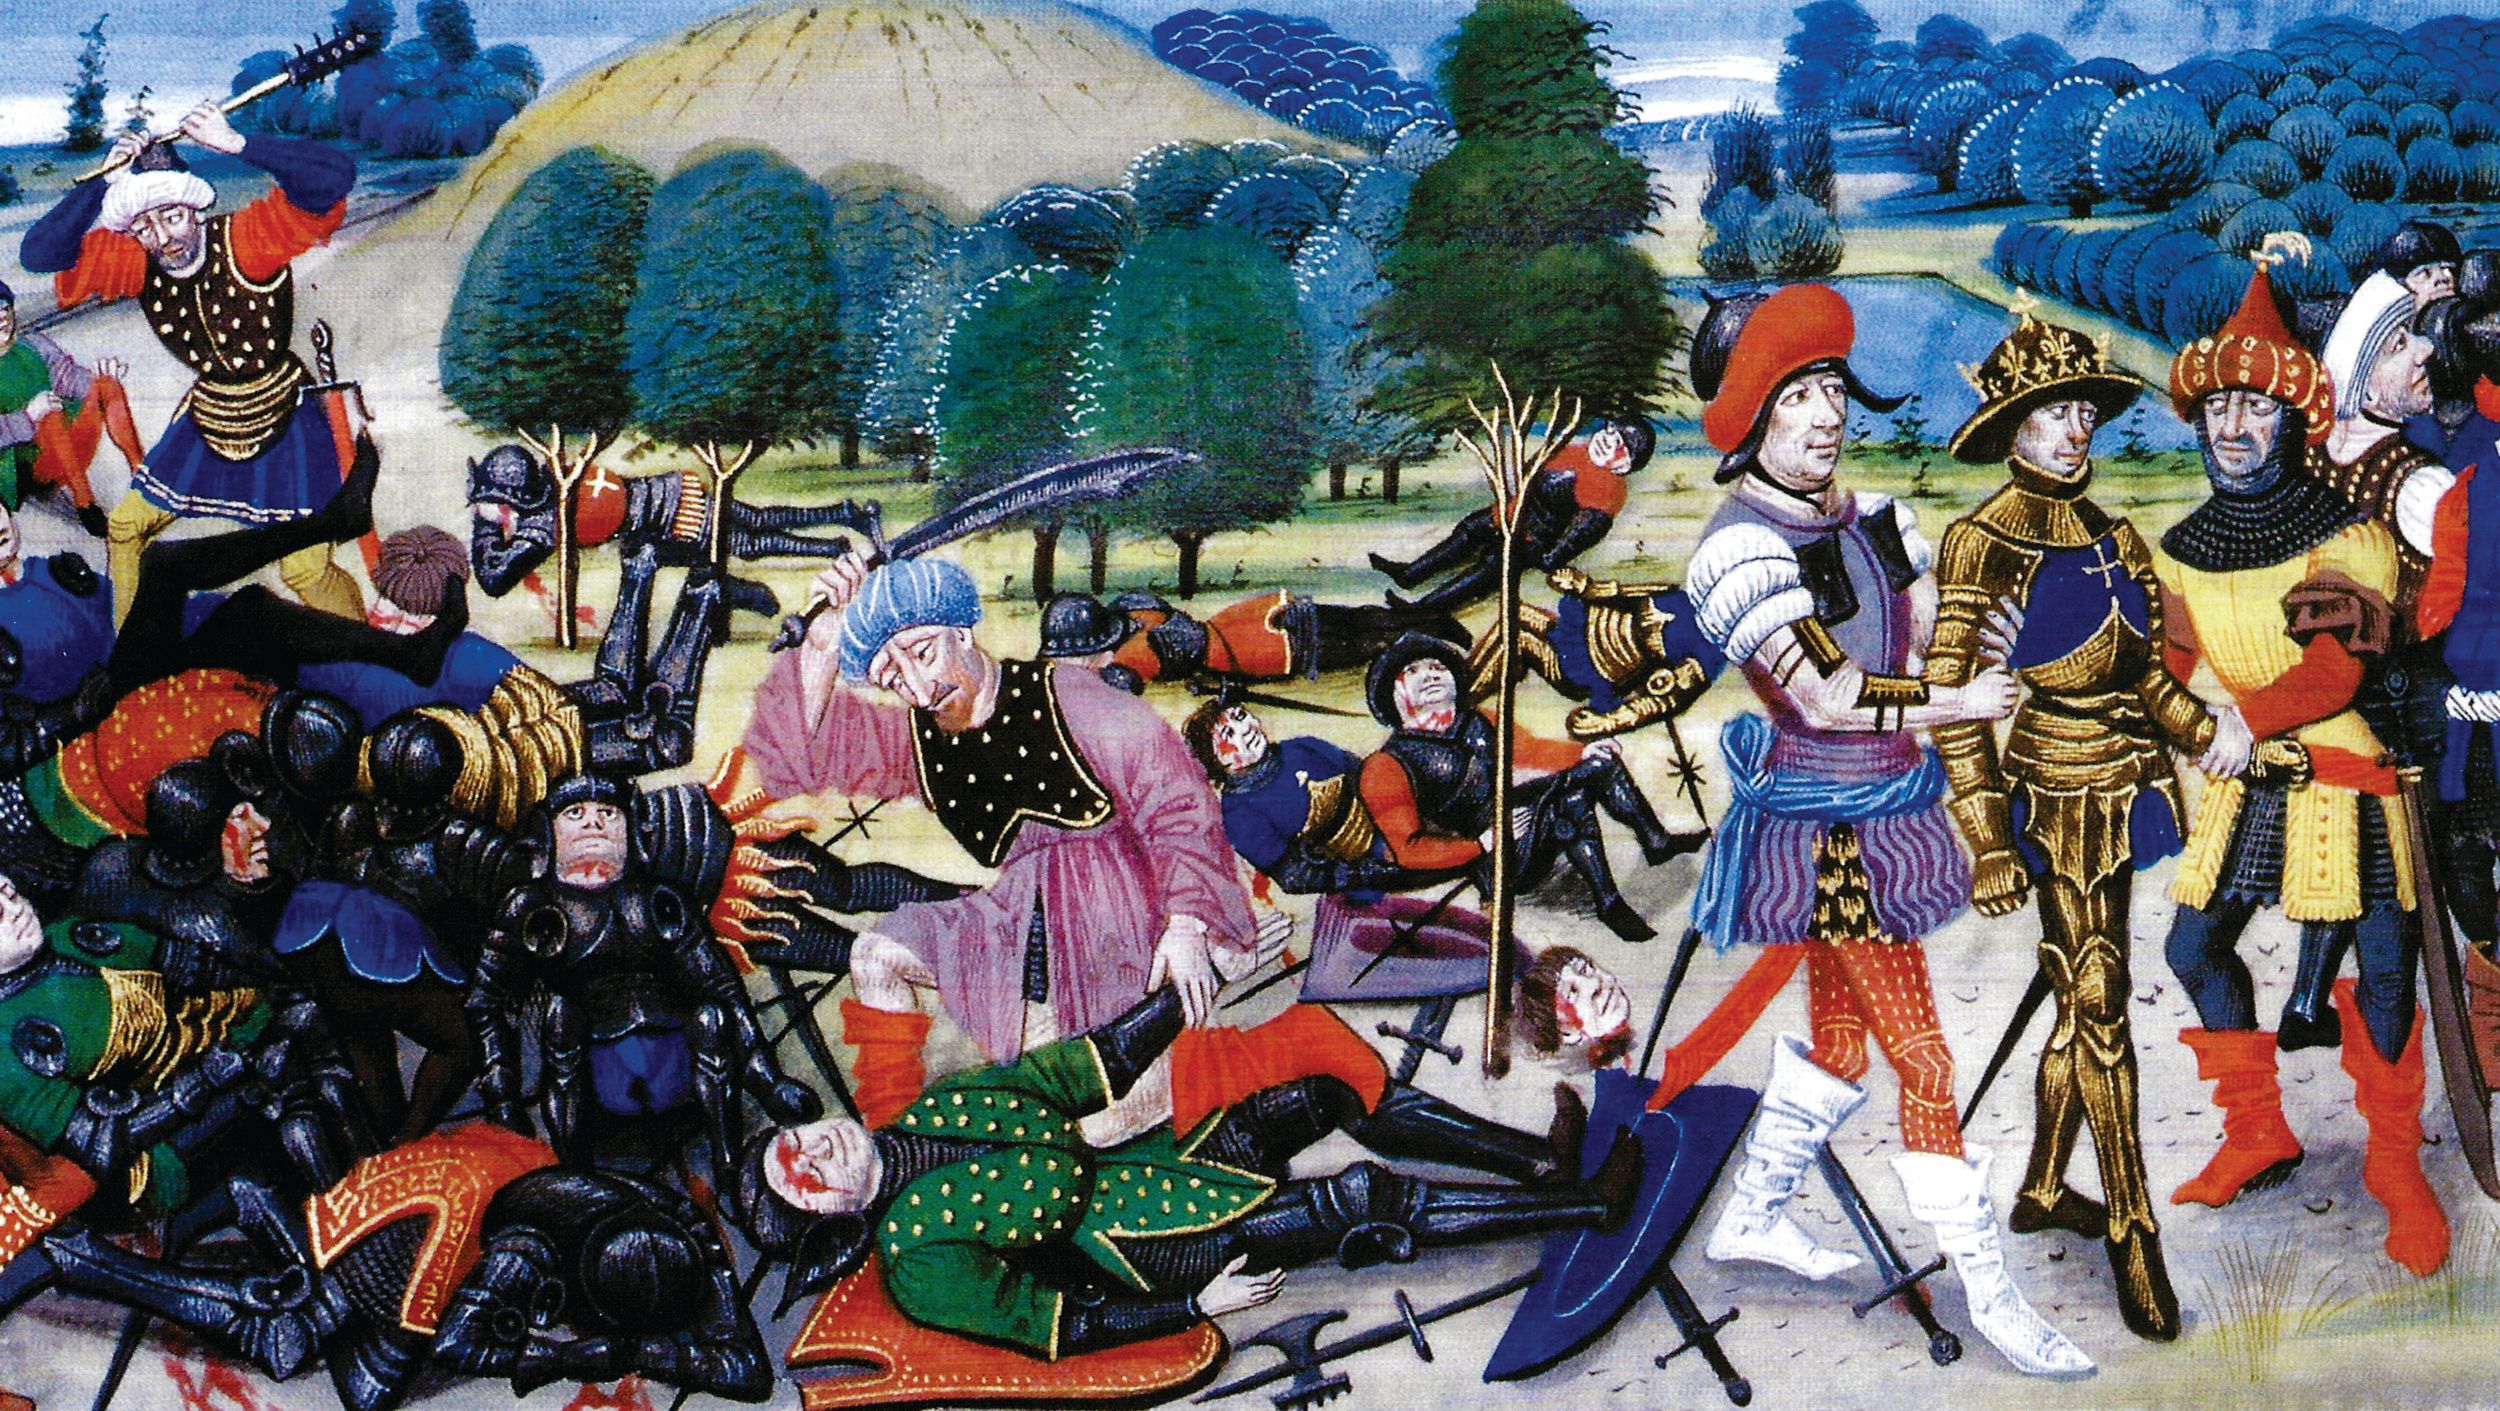 Detail of this miniature painting depicts the capture of King Louis IX (Saint Louis). Weak and disease-ridden Louis and most of his rear guard were captured  at the town of Fariskur. After long negotiations, Damietta was restored to the sultan, along with a substantial sum, in return for King Louis and any of his surviving knights. 